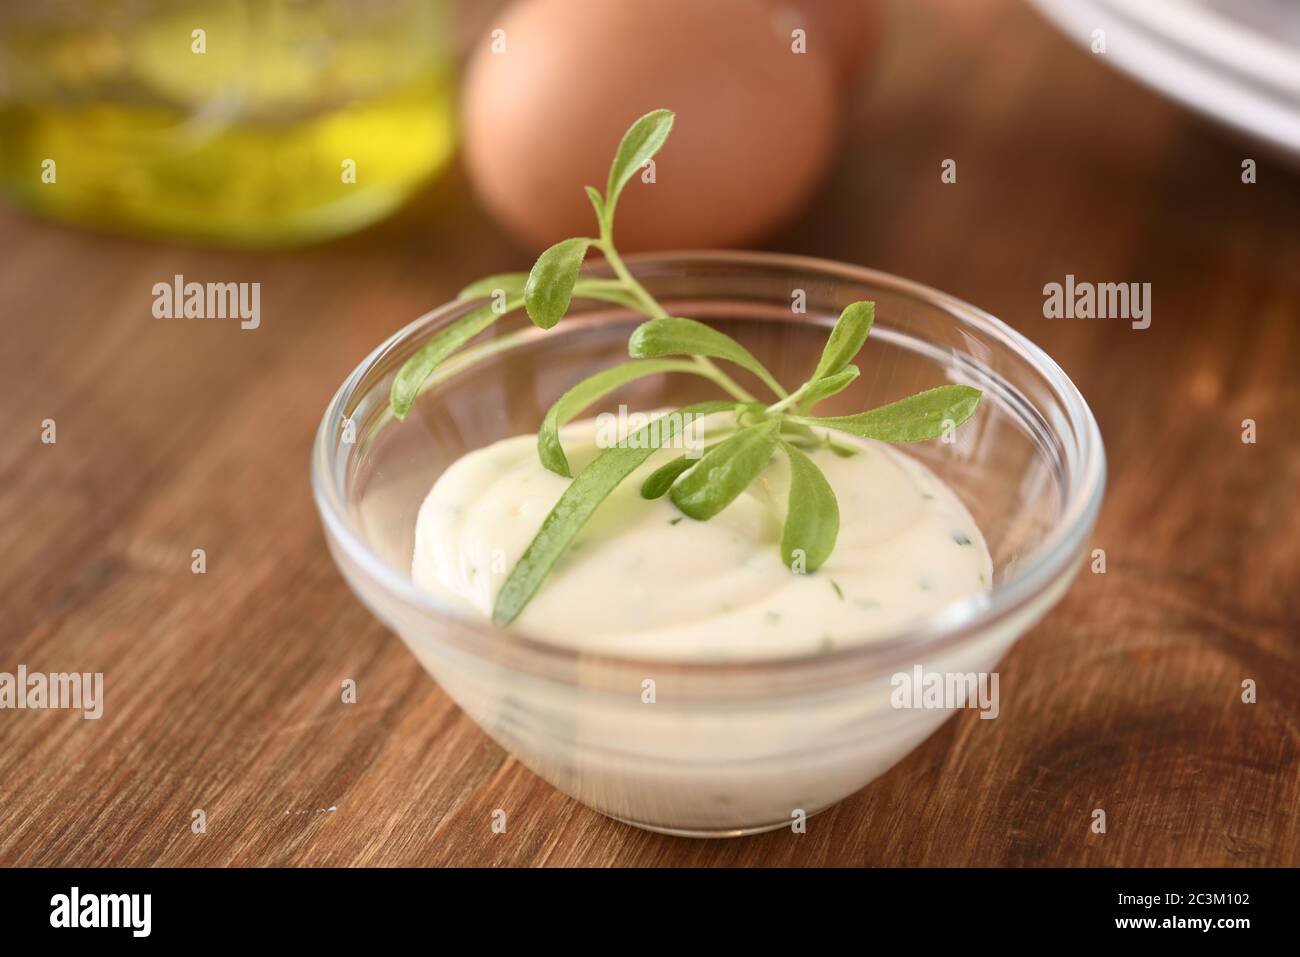 Bowl of mayonnaise with tarragon leaves Stock Photo